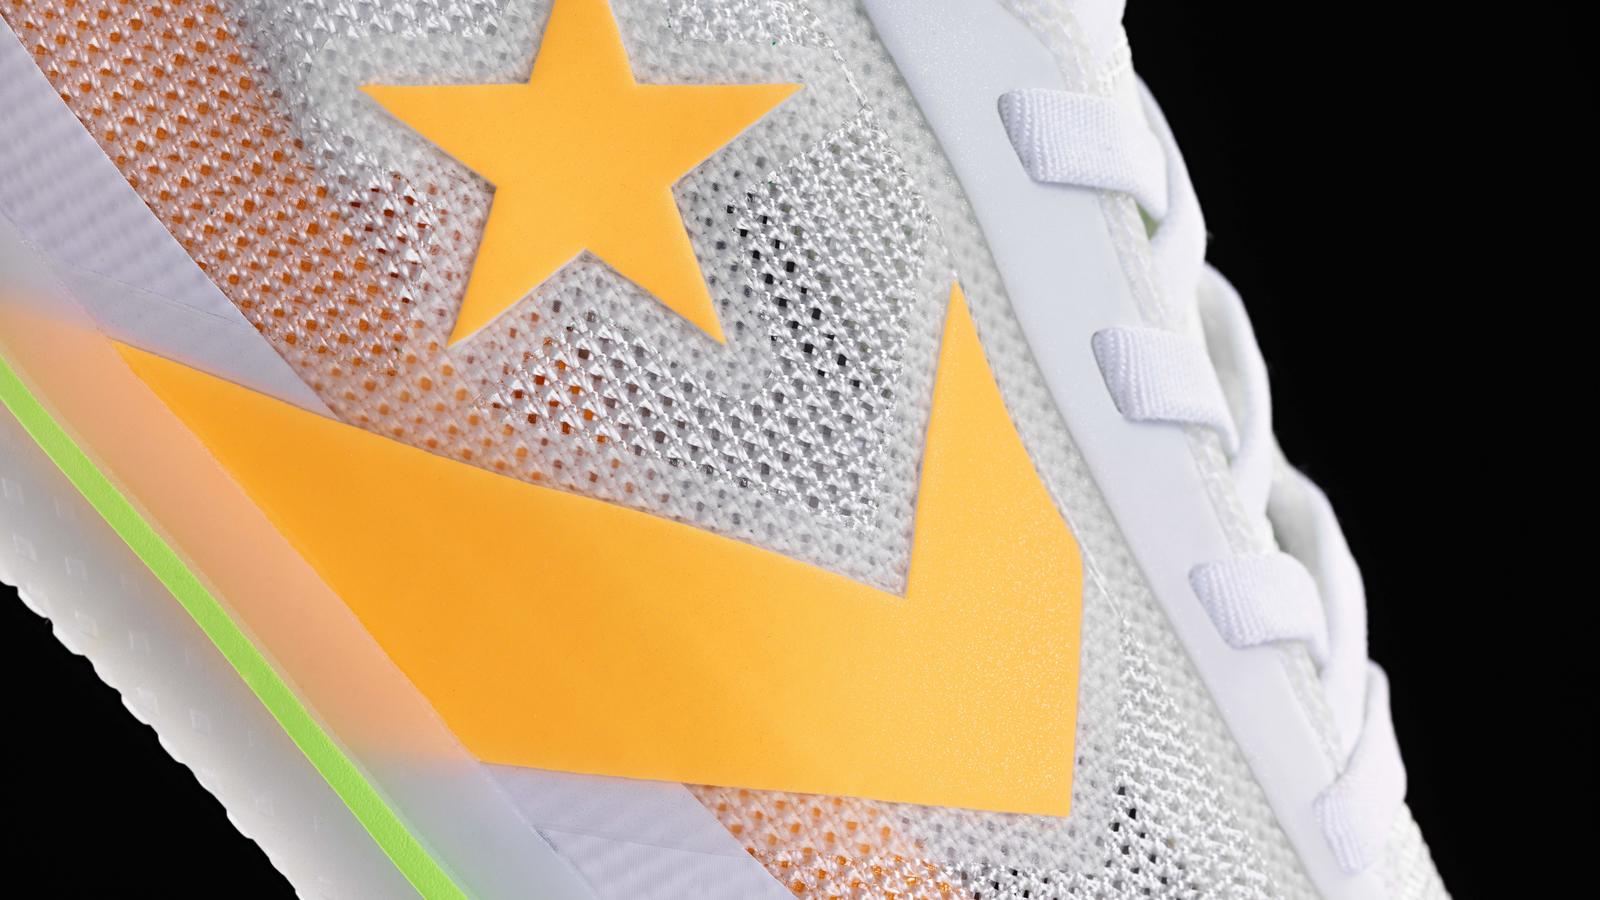 Converse All Star Pro BB Hyperbrights Pack Release Date Info